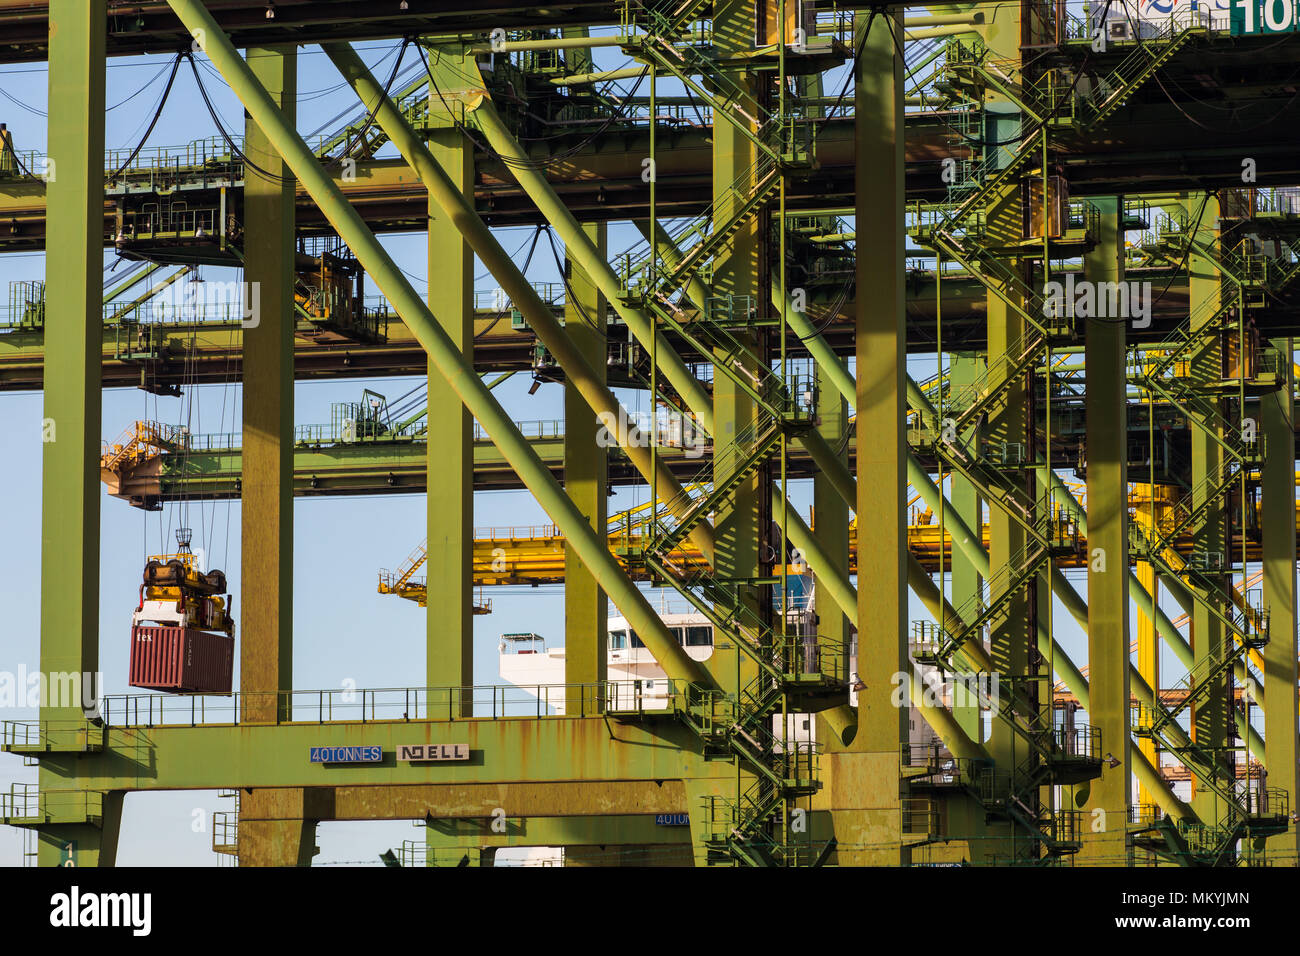 Close up view of the container cranes in lifting process Stock Photo